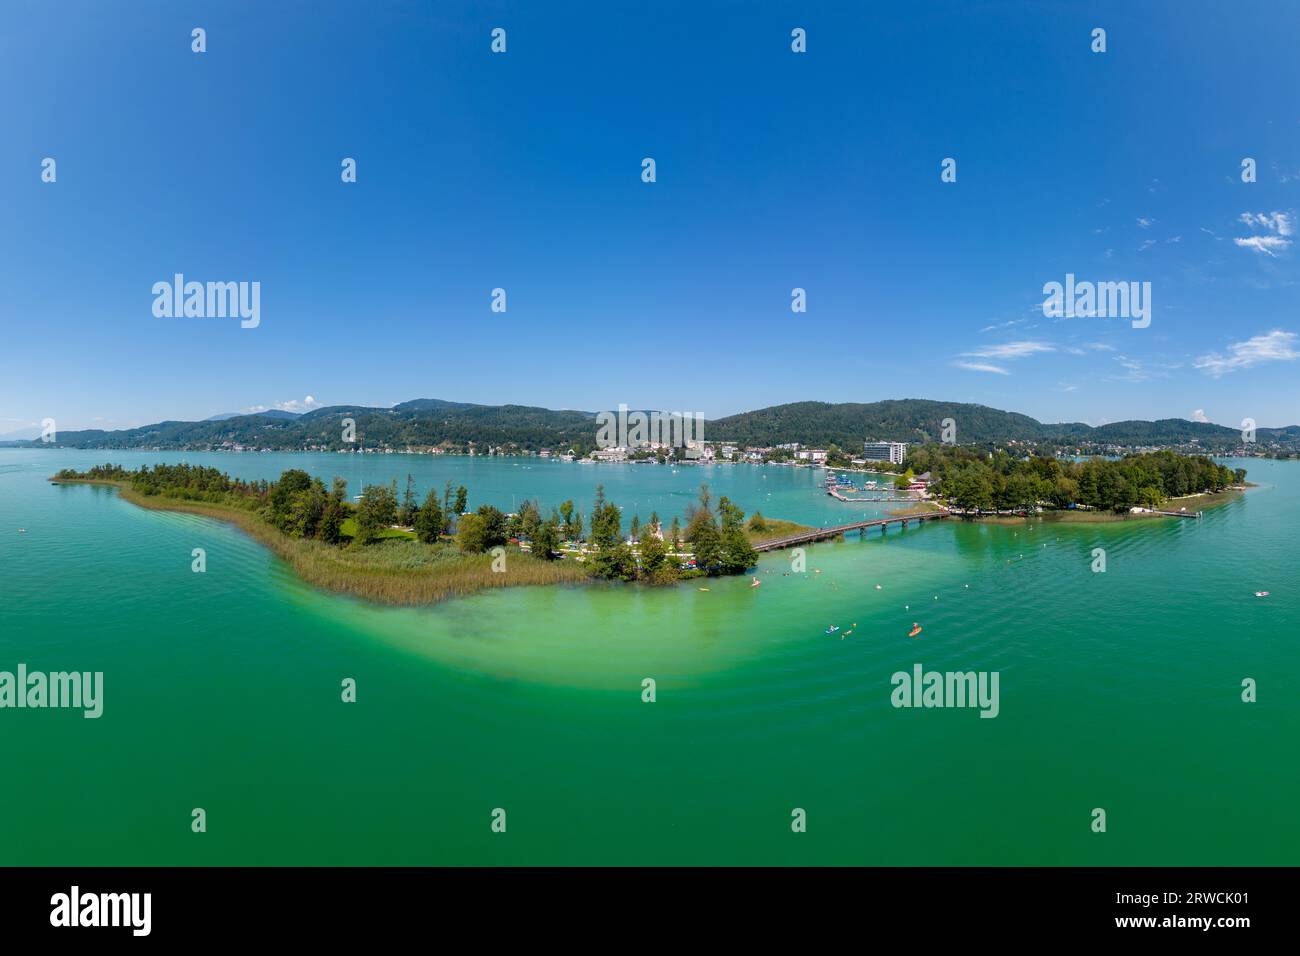 Lake Wörthersee close to Pörtschach in Carinthia. Aerial view of the famous touristic destination in the South of Austria. Stock Photo